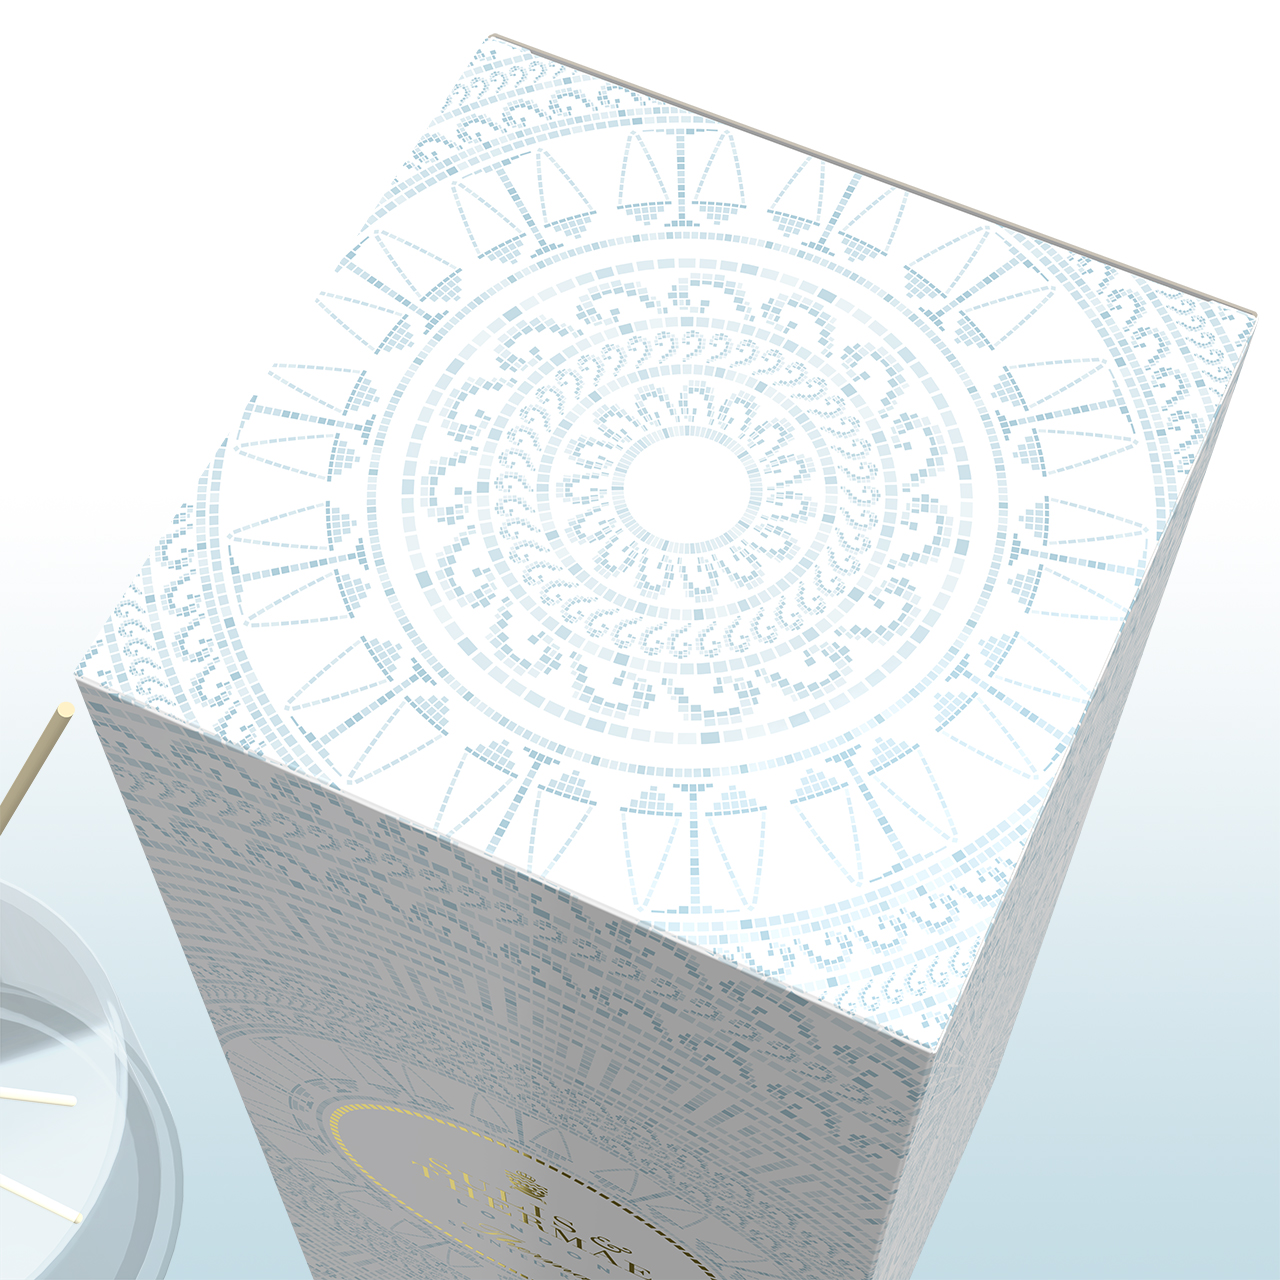 Close-up of carton lid Roman-style patterns designed by Paul Cartwright Branding for Sulisandthermae.com's luxury fragrance brand.